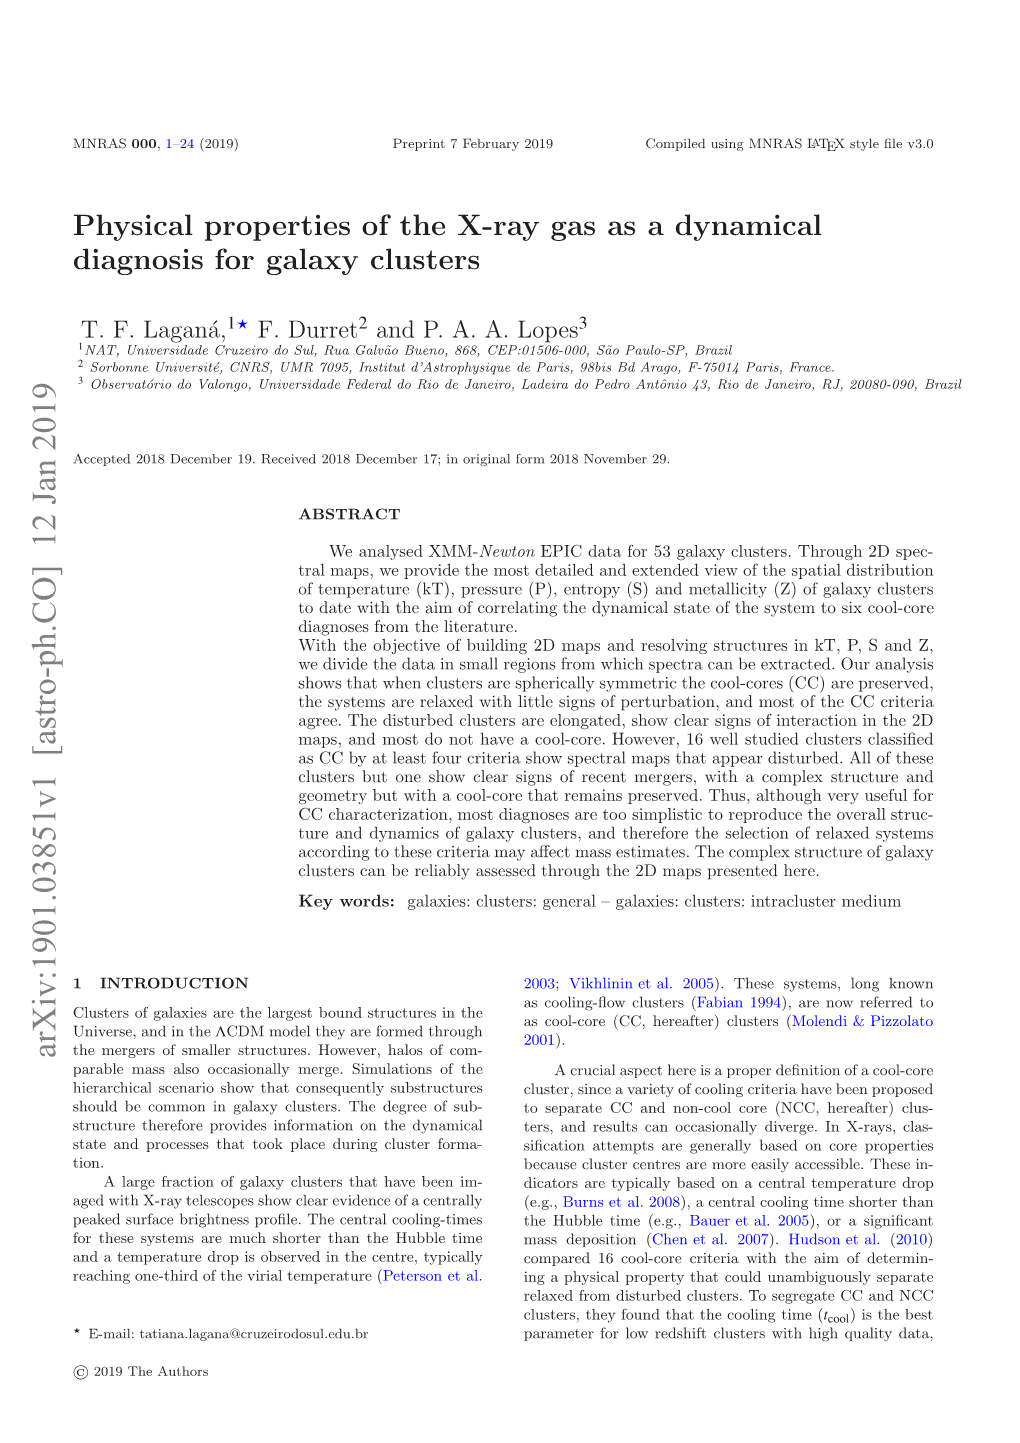 Physical Properties of the X-Ray Gas As a Dynamical Diagnosis for Galaxy